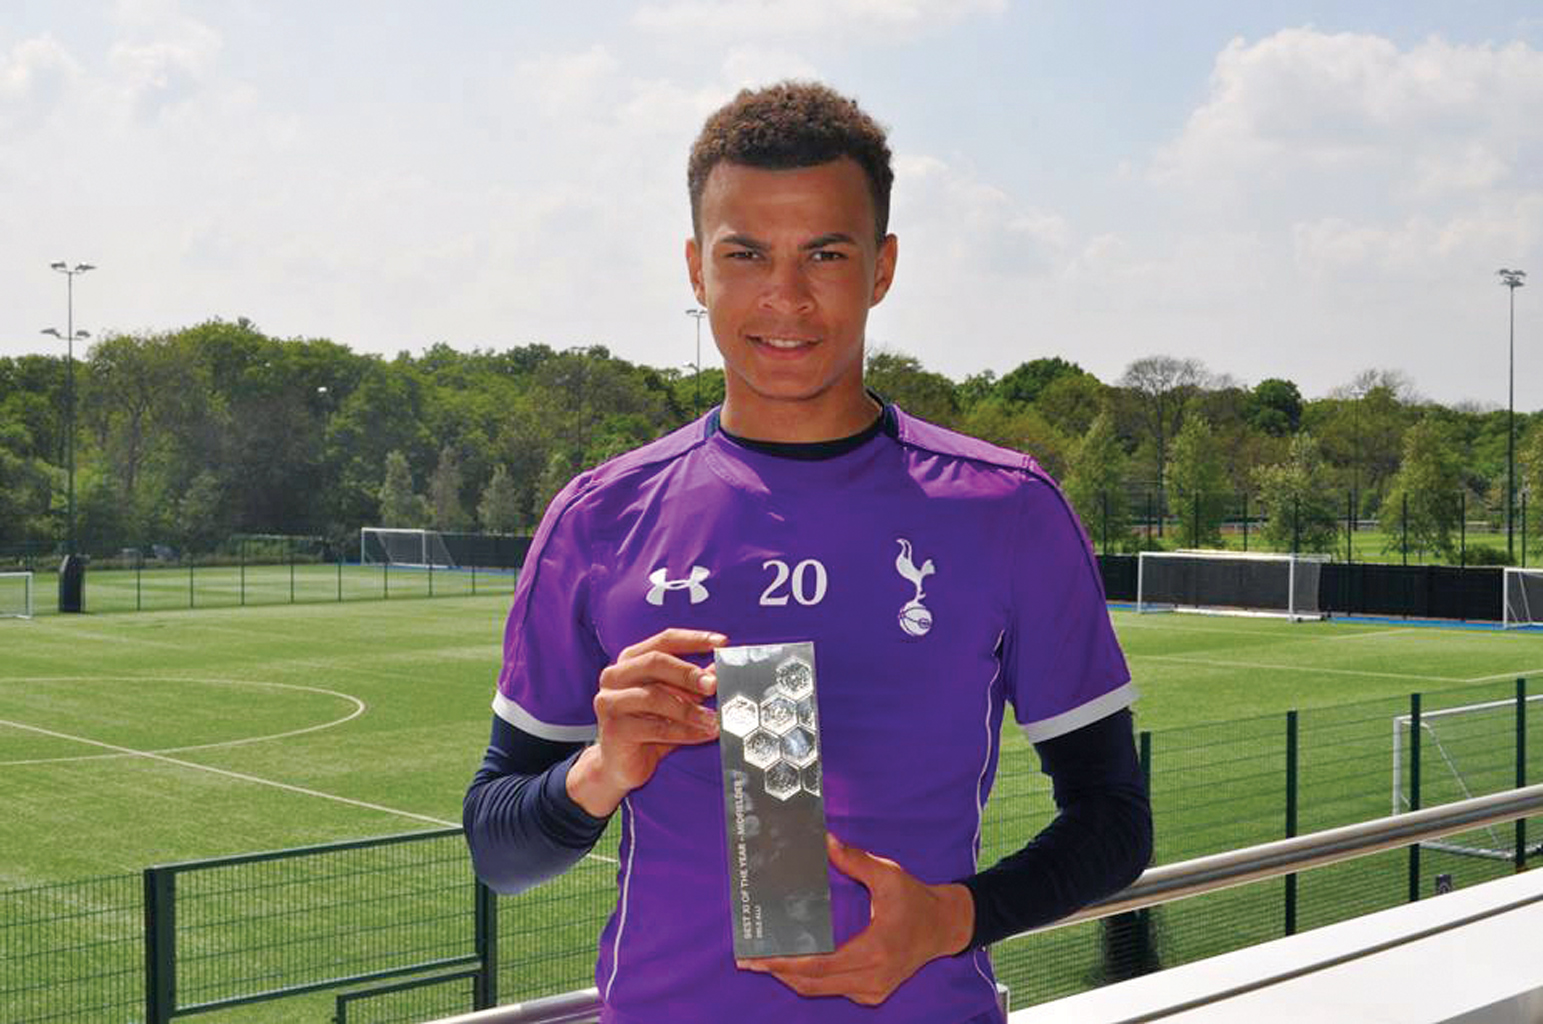 Who: Dele Alli, 20 years old, Midfielder, England Why: Recently voted Young Player of the Year by his peers in England, Alli has made his mark on the world’s most competitive football league. He was an unknown when he signed for Tottenham Hotspur from MK Dons in February 2015. Now, he is seen as one of the key driving forces in Tottenham’s wonderful season. At just 20, he has already emulated the likes of his idol Steven Gerrard with his range of passing and his ability to contribute vital goals from midfield. Seen as an exciting young prospect for English football, England fans would surely be excited to see what else he can do at the Euros.